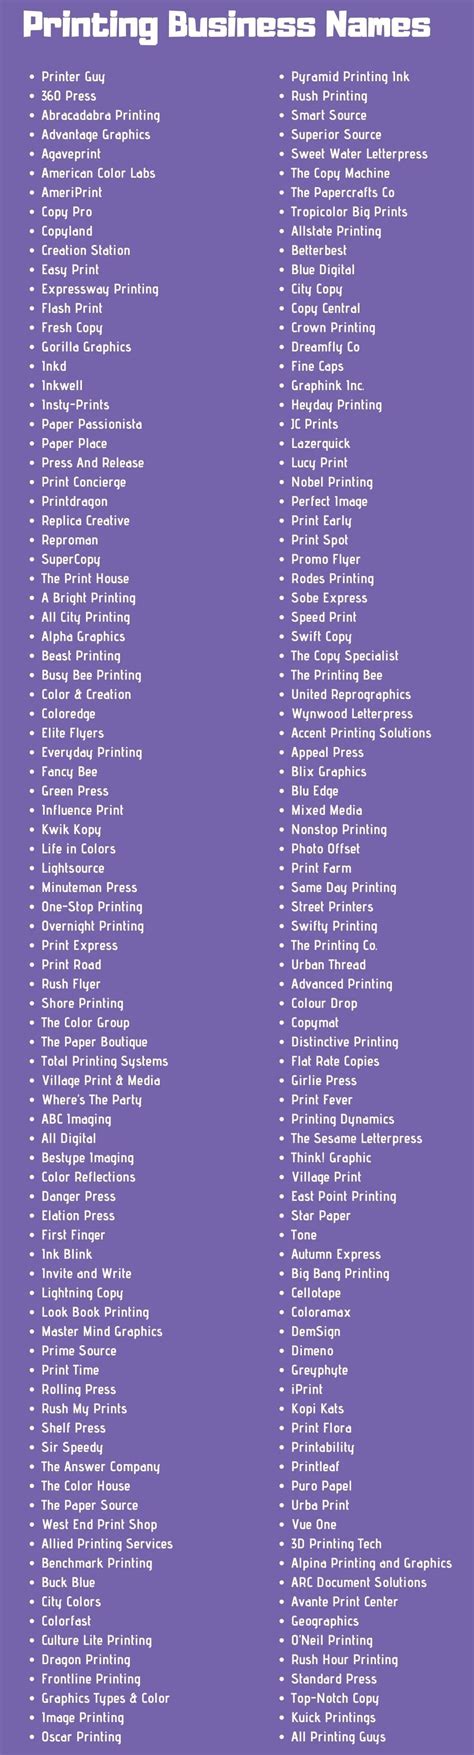 creative business names list cute business names catchy business  ideas business company